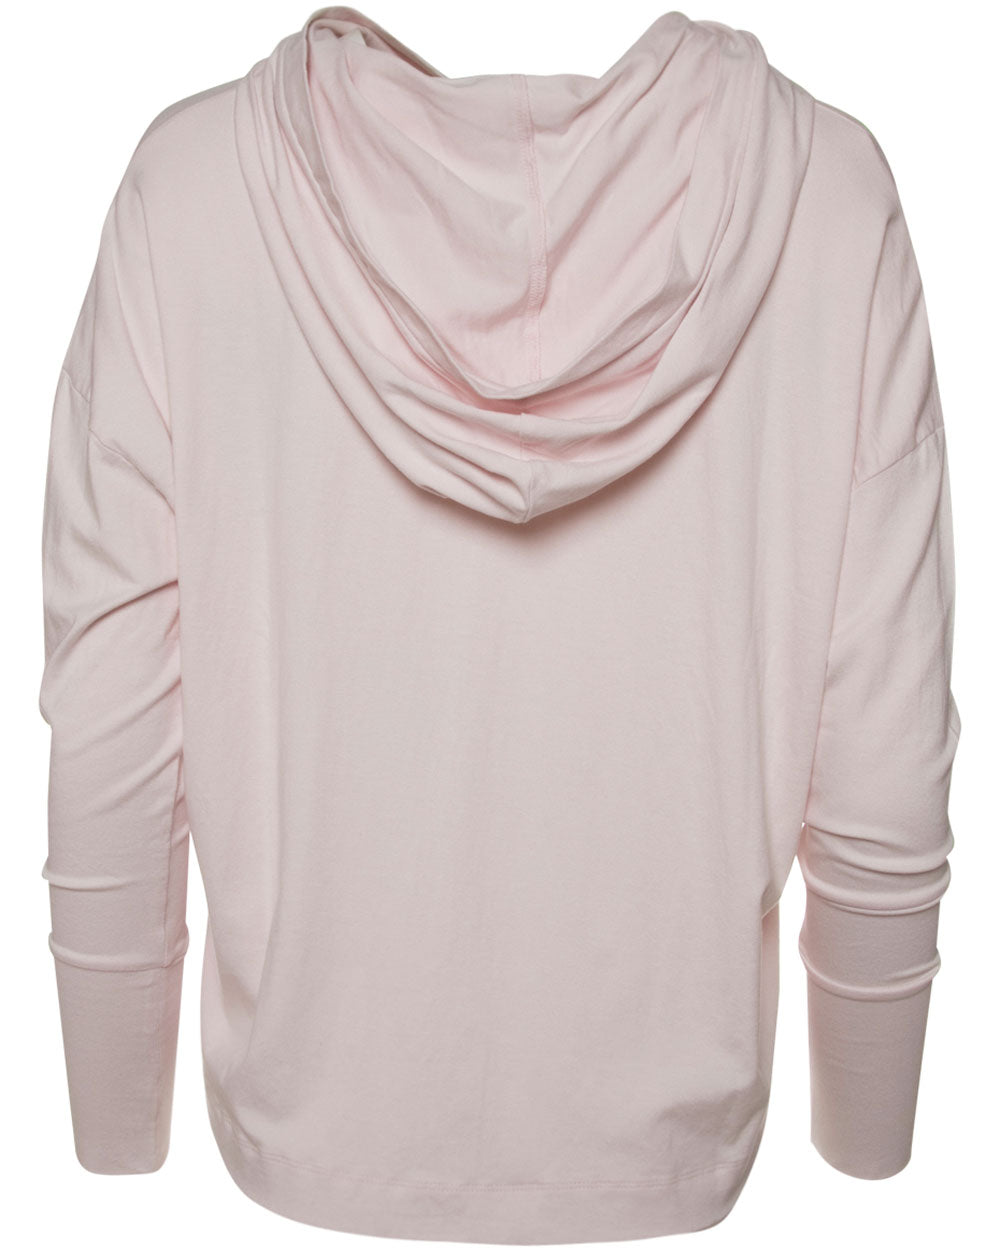 Petal Pink Button Up Hoodie